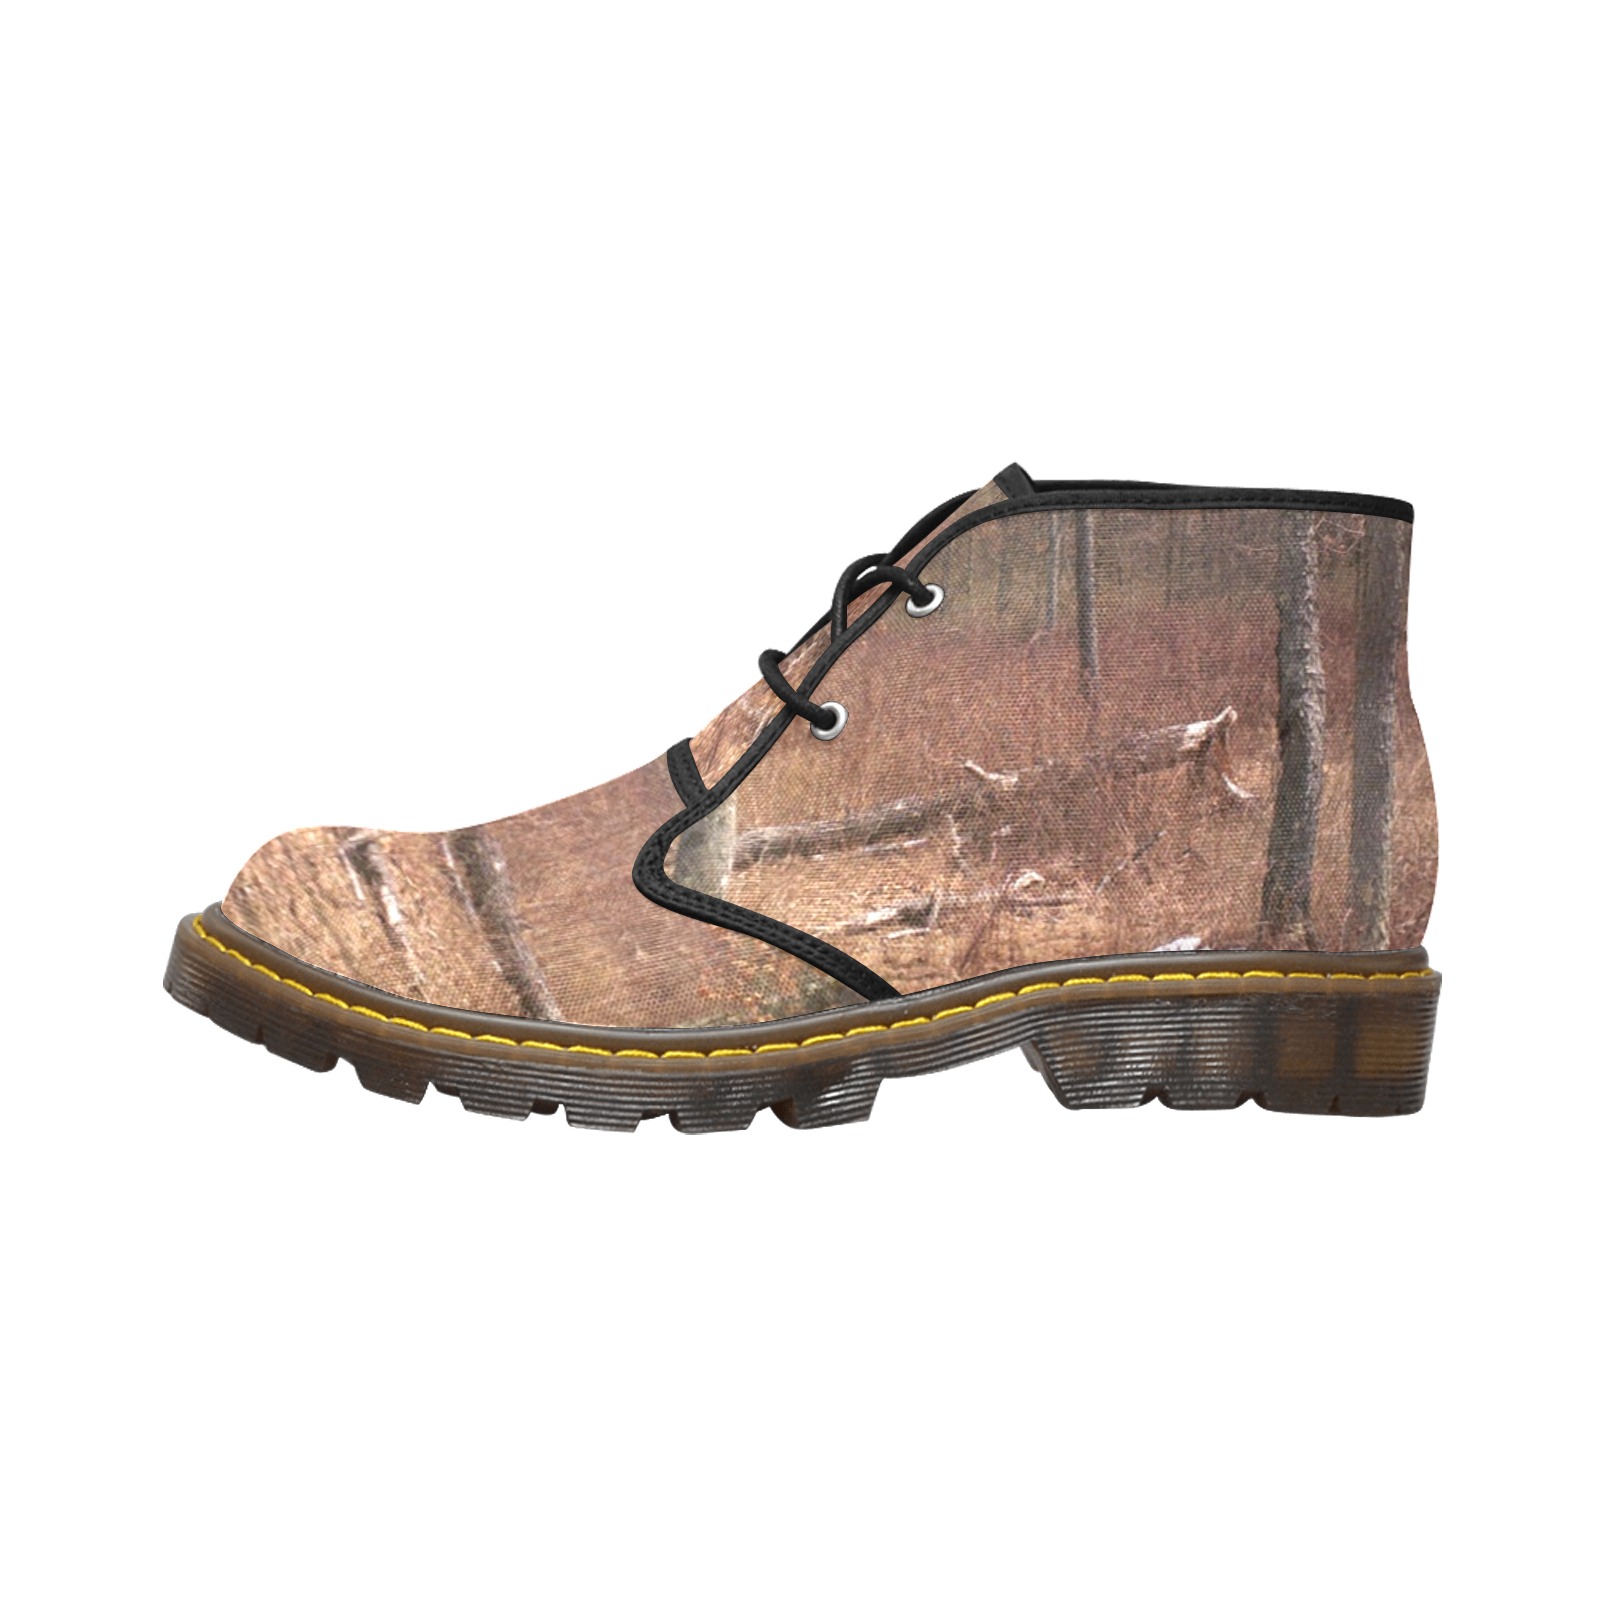 Falling tree in the woods Men's Canvas Chukka Boots (Model 2402-1)